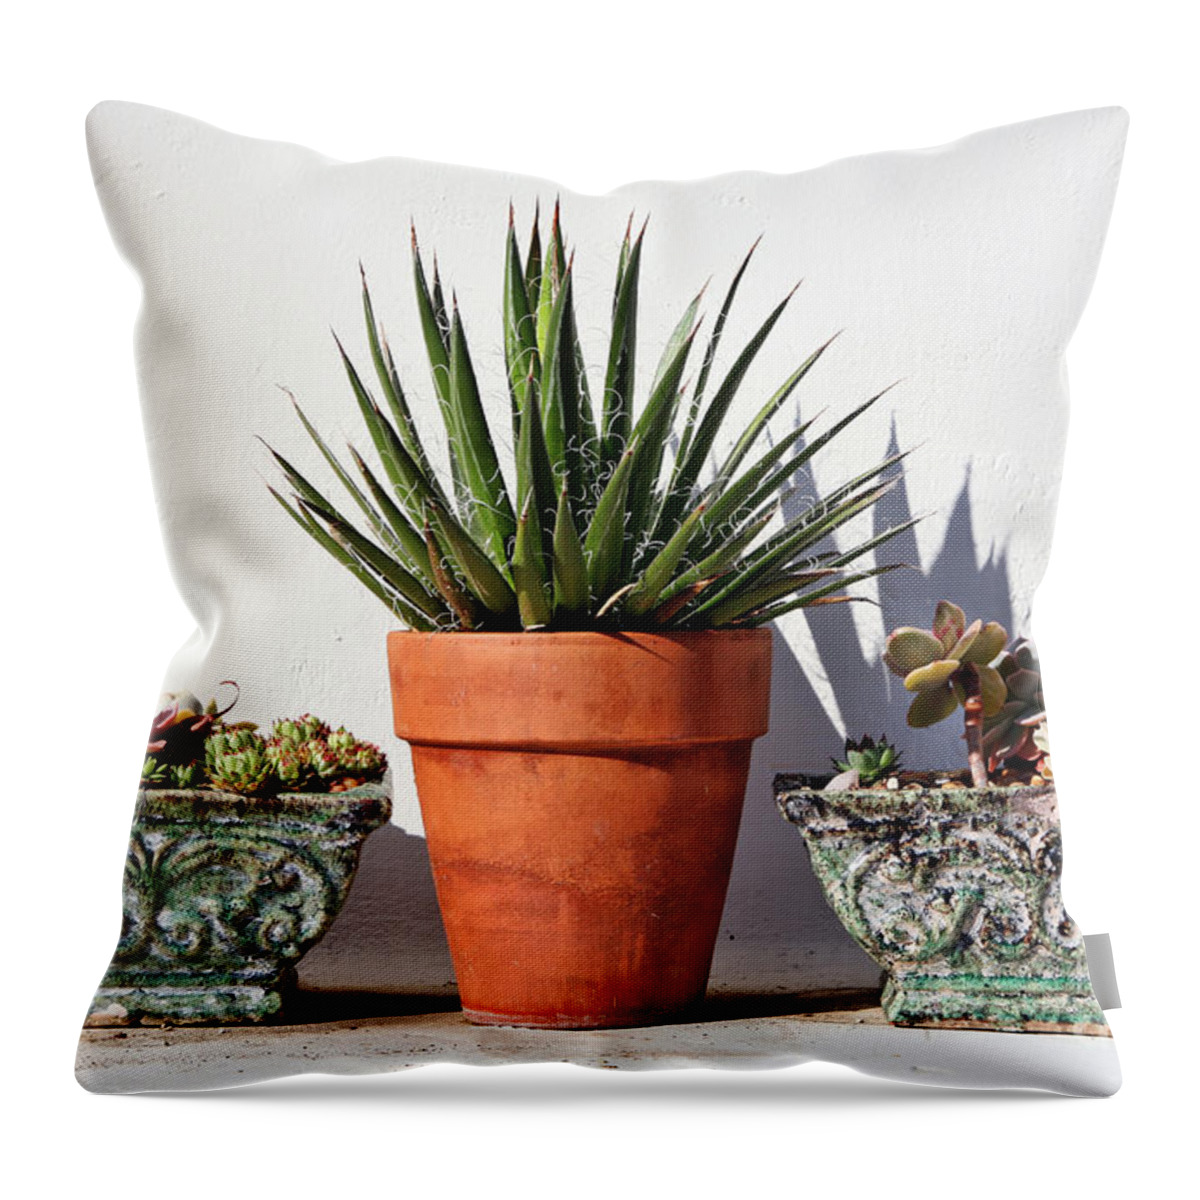 Kate Mckenna Throw Pillow featuring the photograph Potted Succulents by Kate McKenna